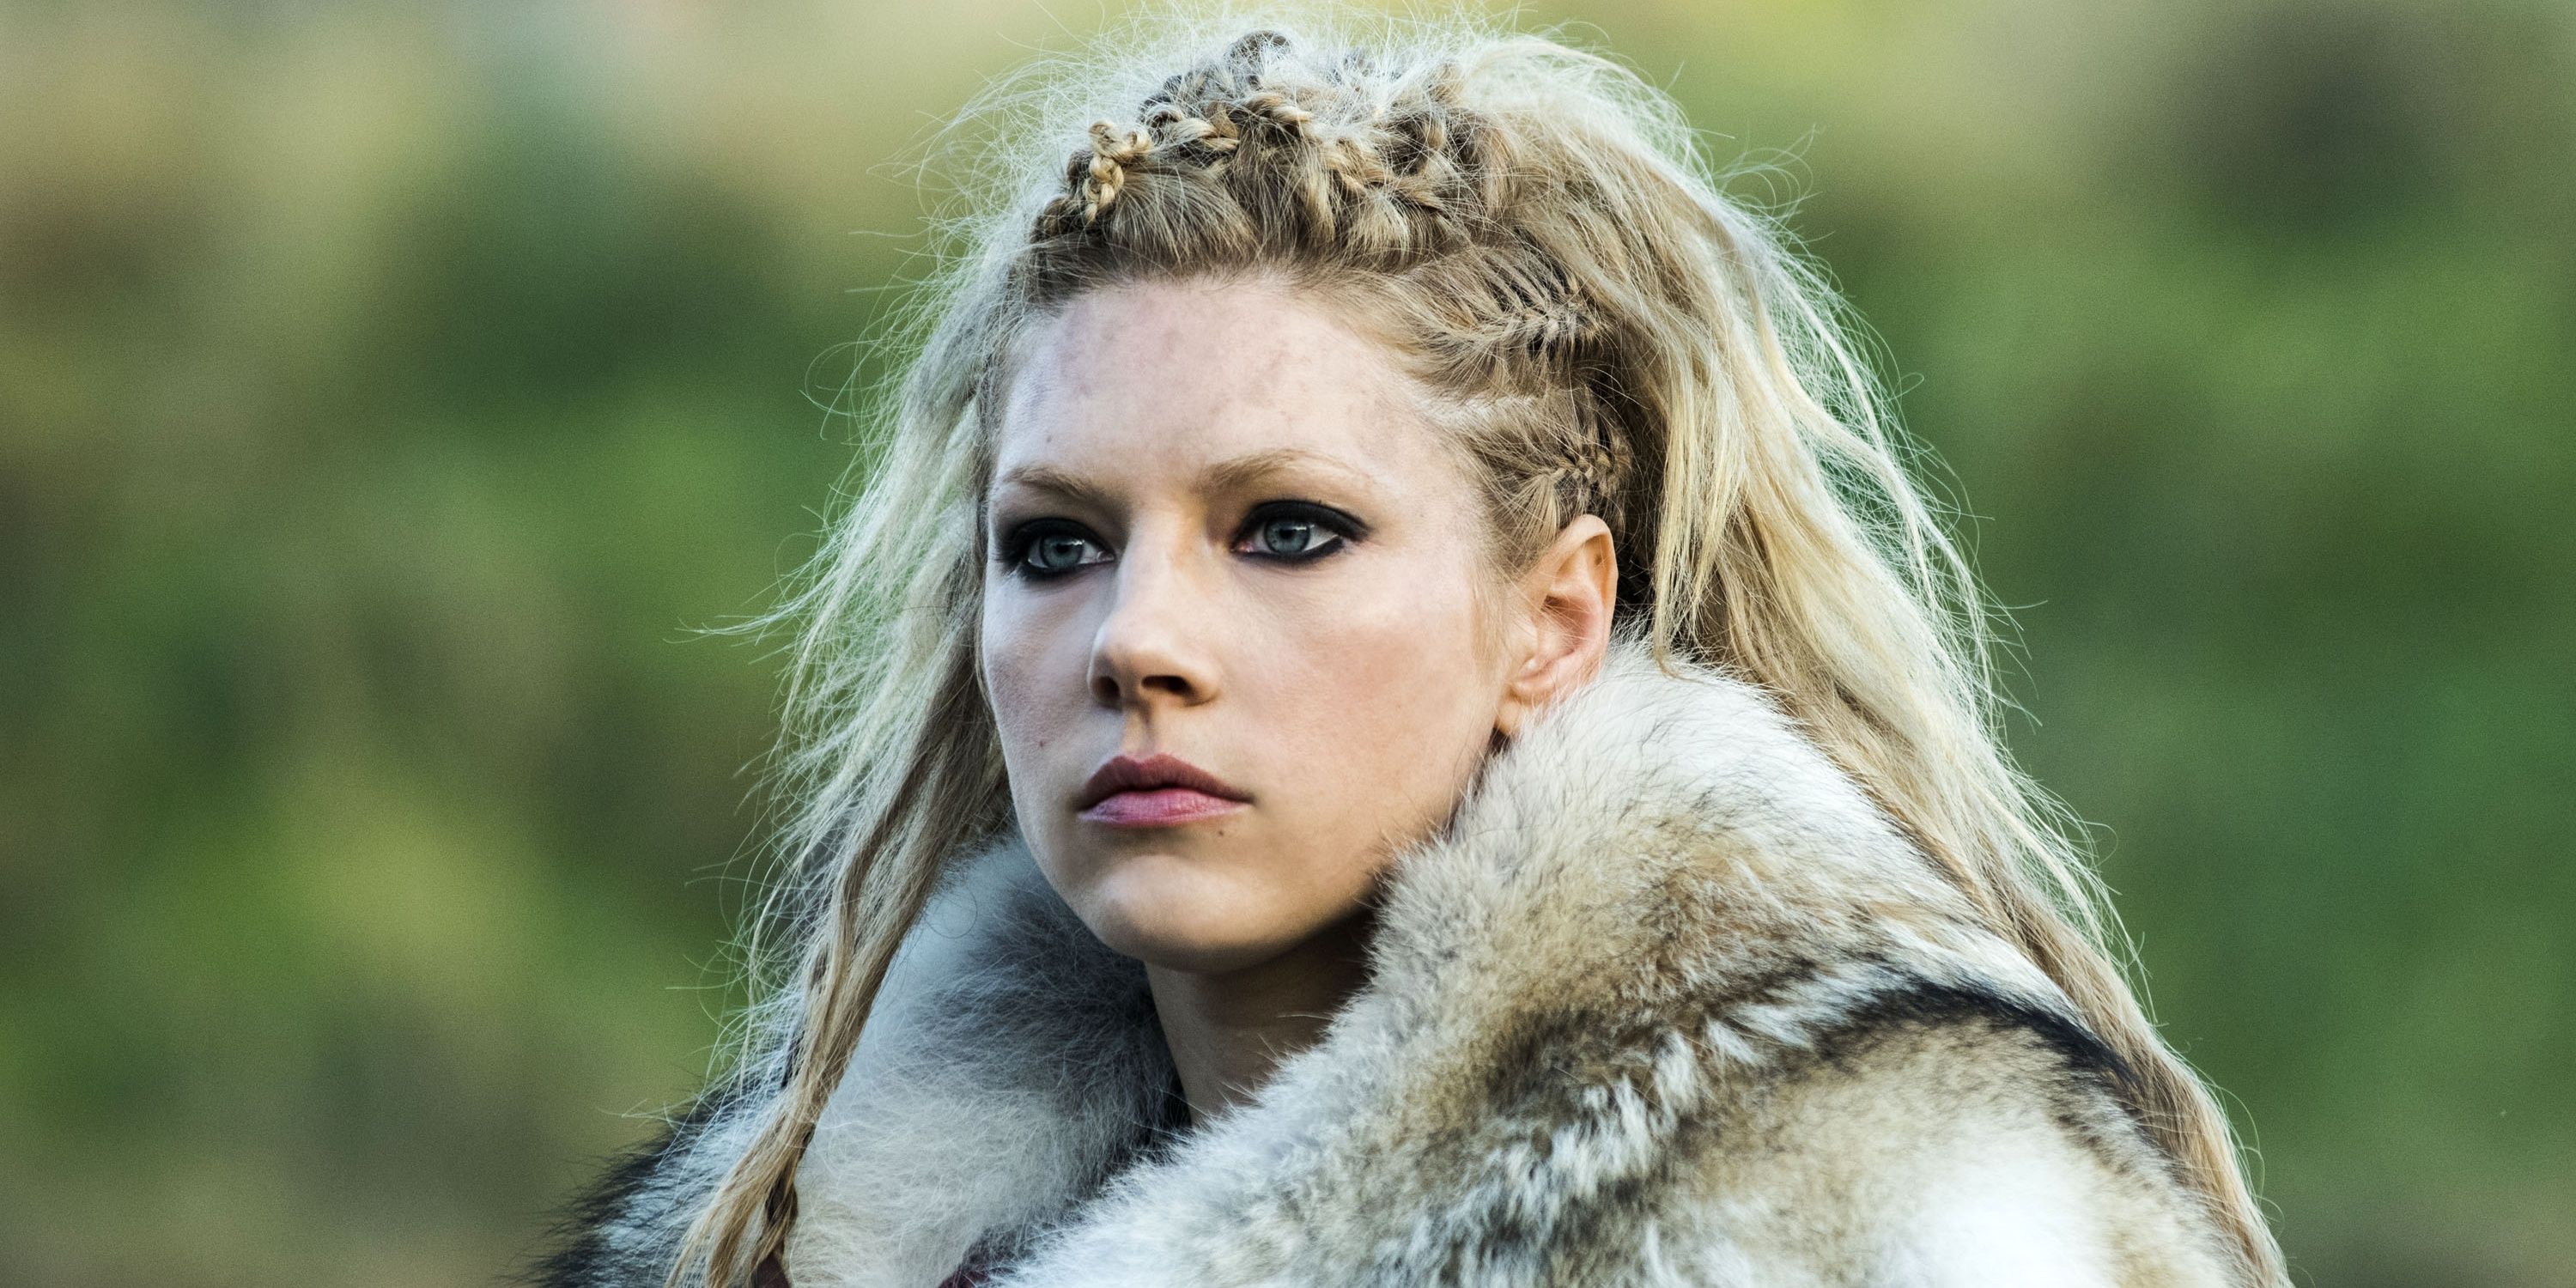 Vikings 5 Characters Wed Love To Be Friends With (& 5 Wed Rather Avoid)